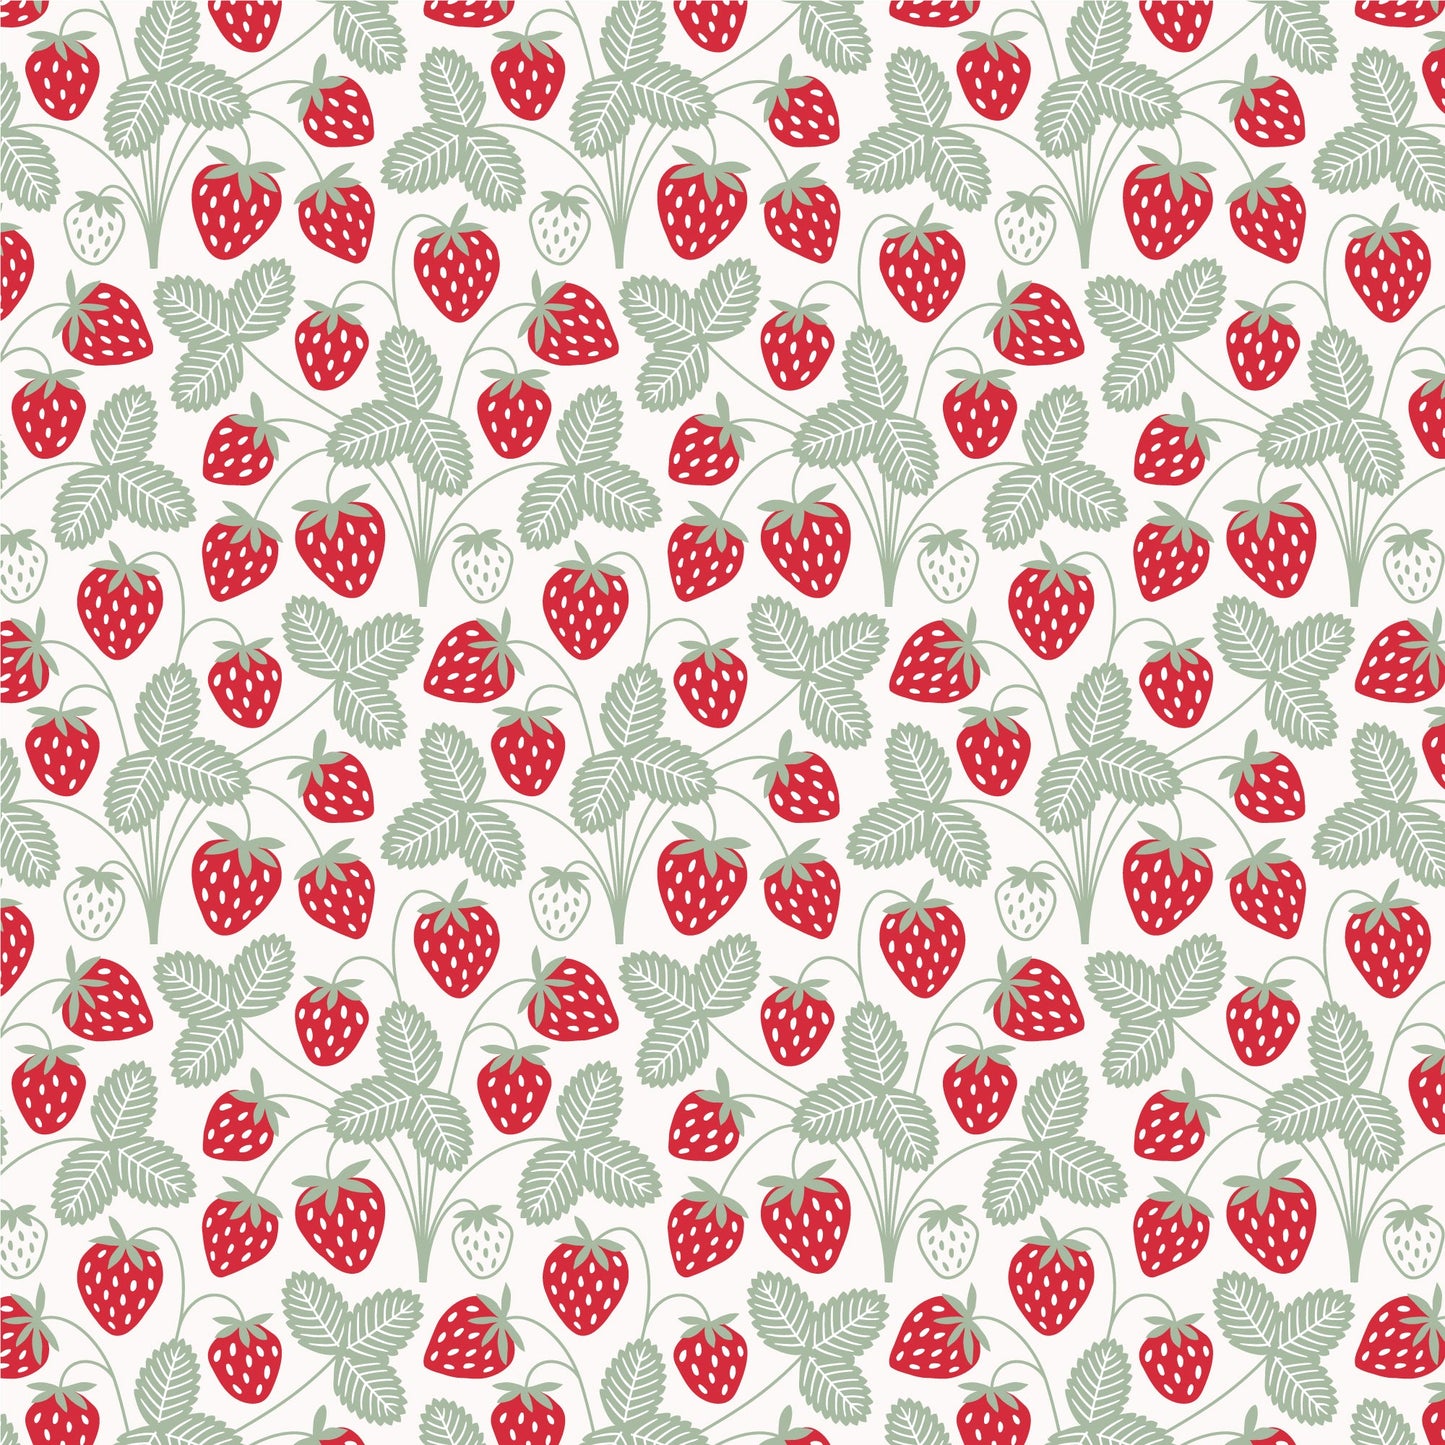 Tank Top - Strawberries Red & Green